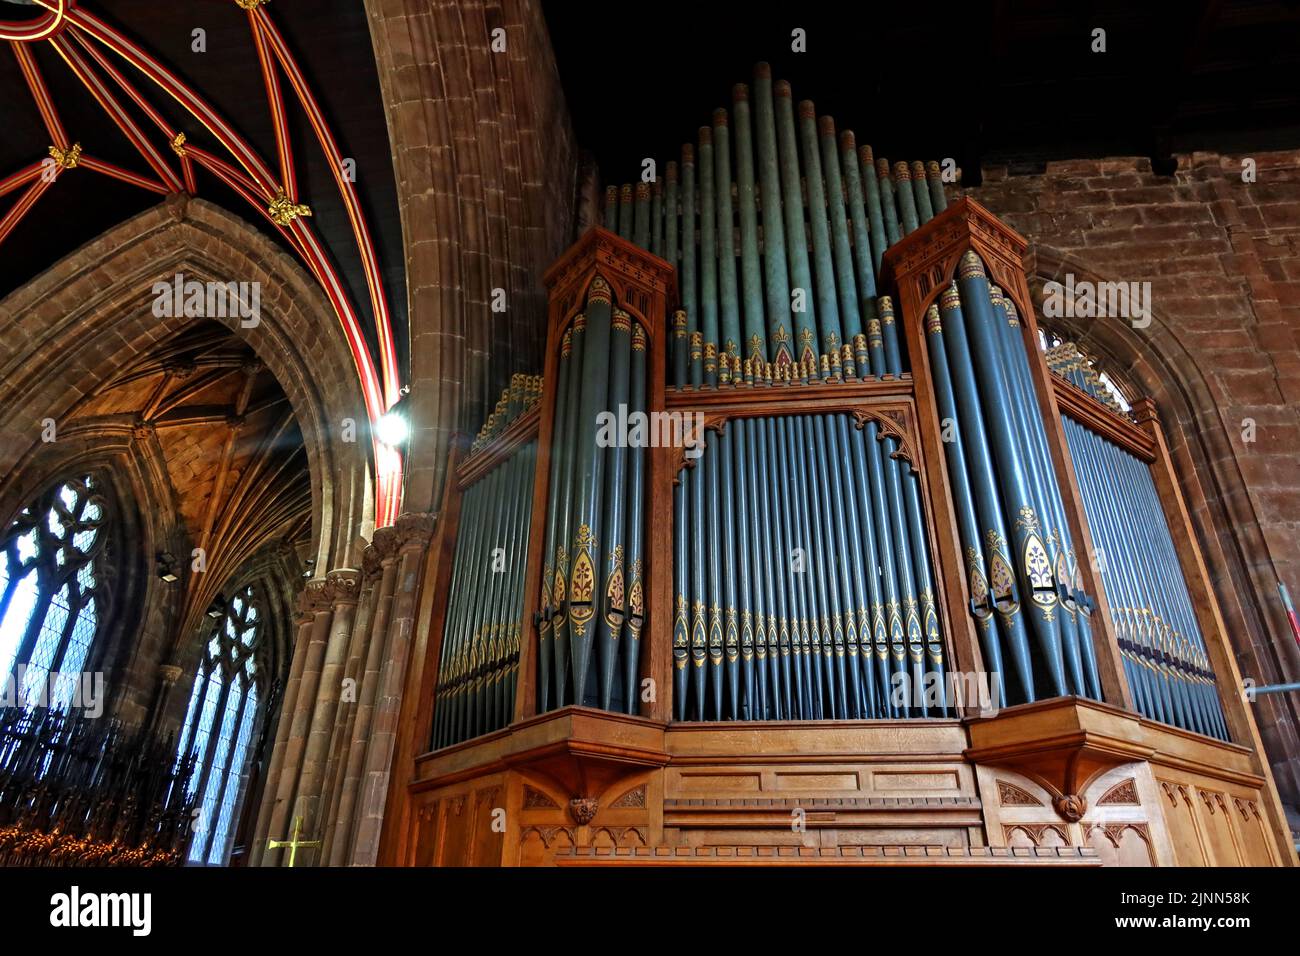 Victorian Forster and Andrews organ in St Mary's Church, Church Lane, Nantwich, Cheshire, England, REGNO UNITO, CW5 5RQ Foto Stock